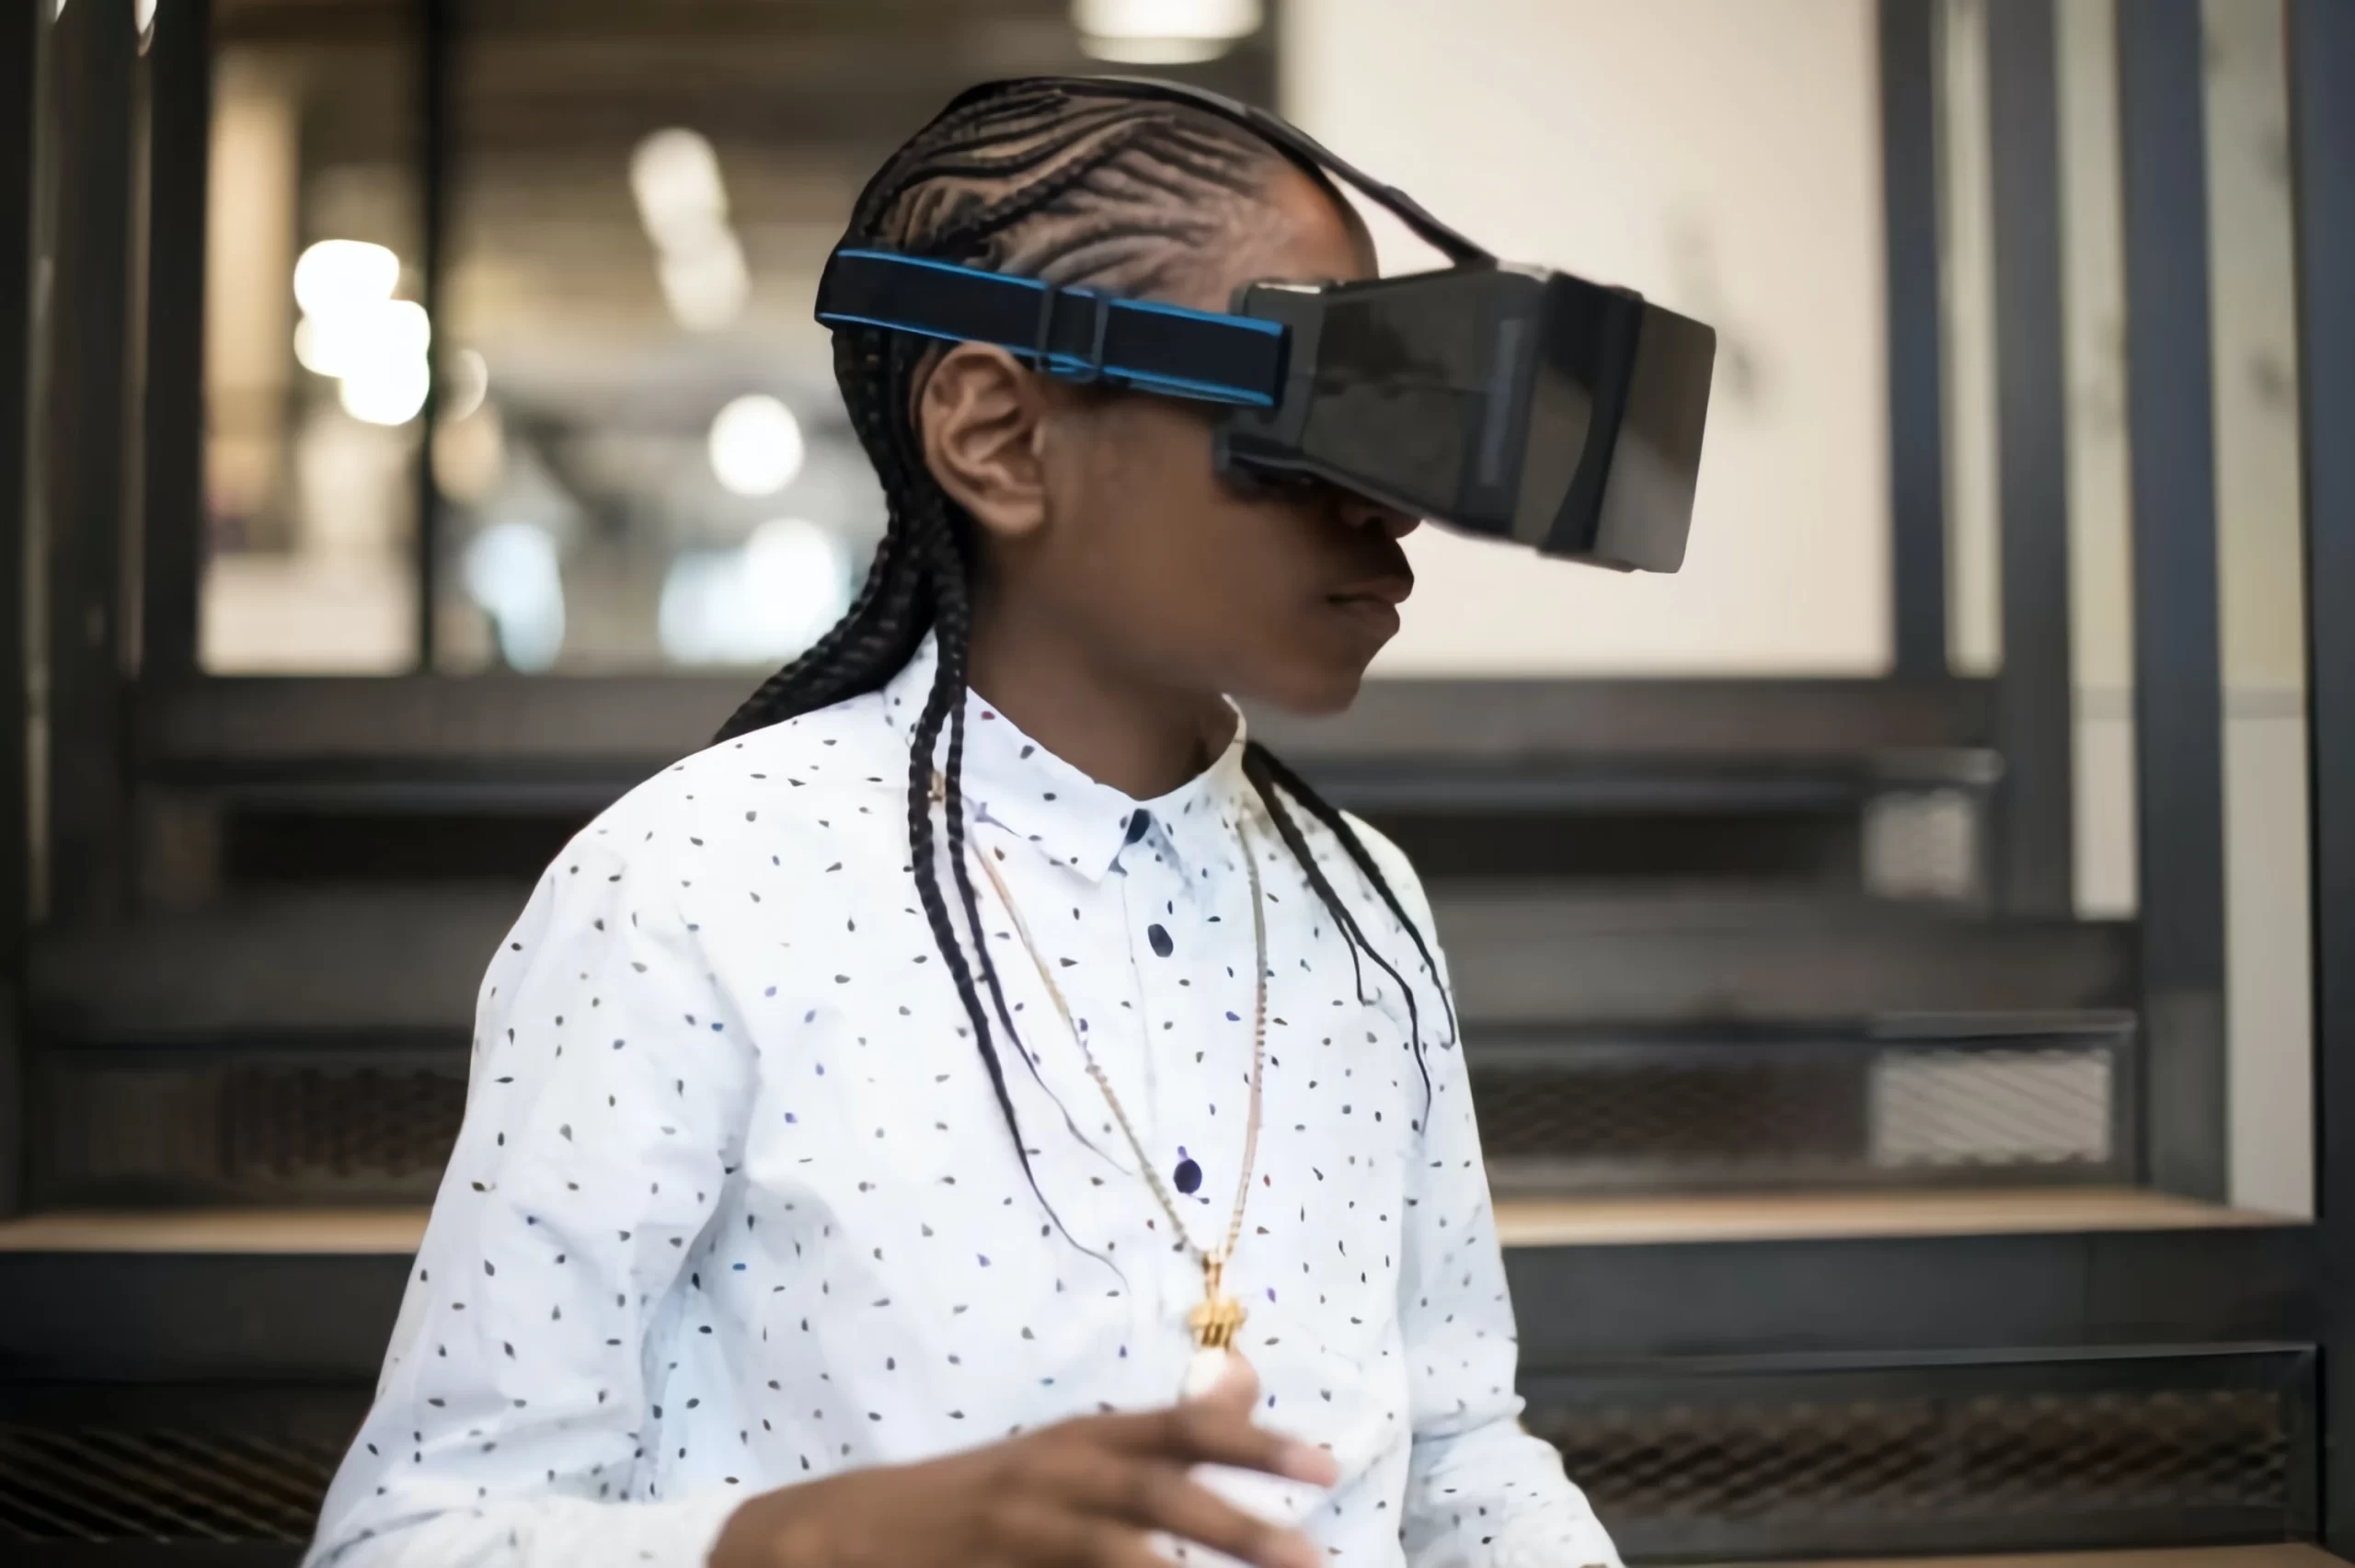 Published on May 26, 2022 Free to use under the Unsplash License Young man on Virtual Reality Headset